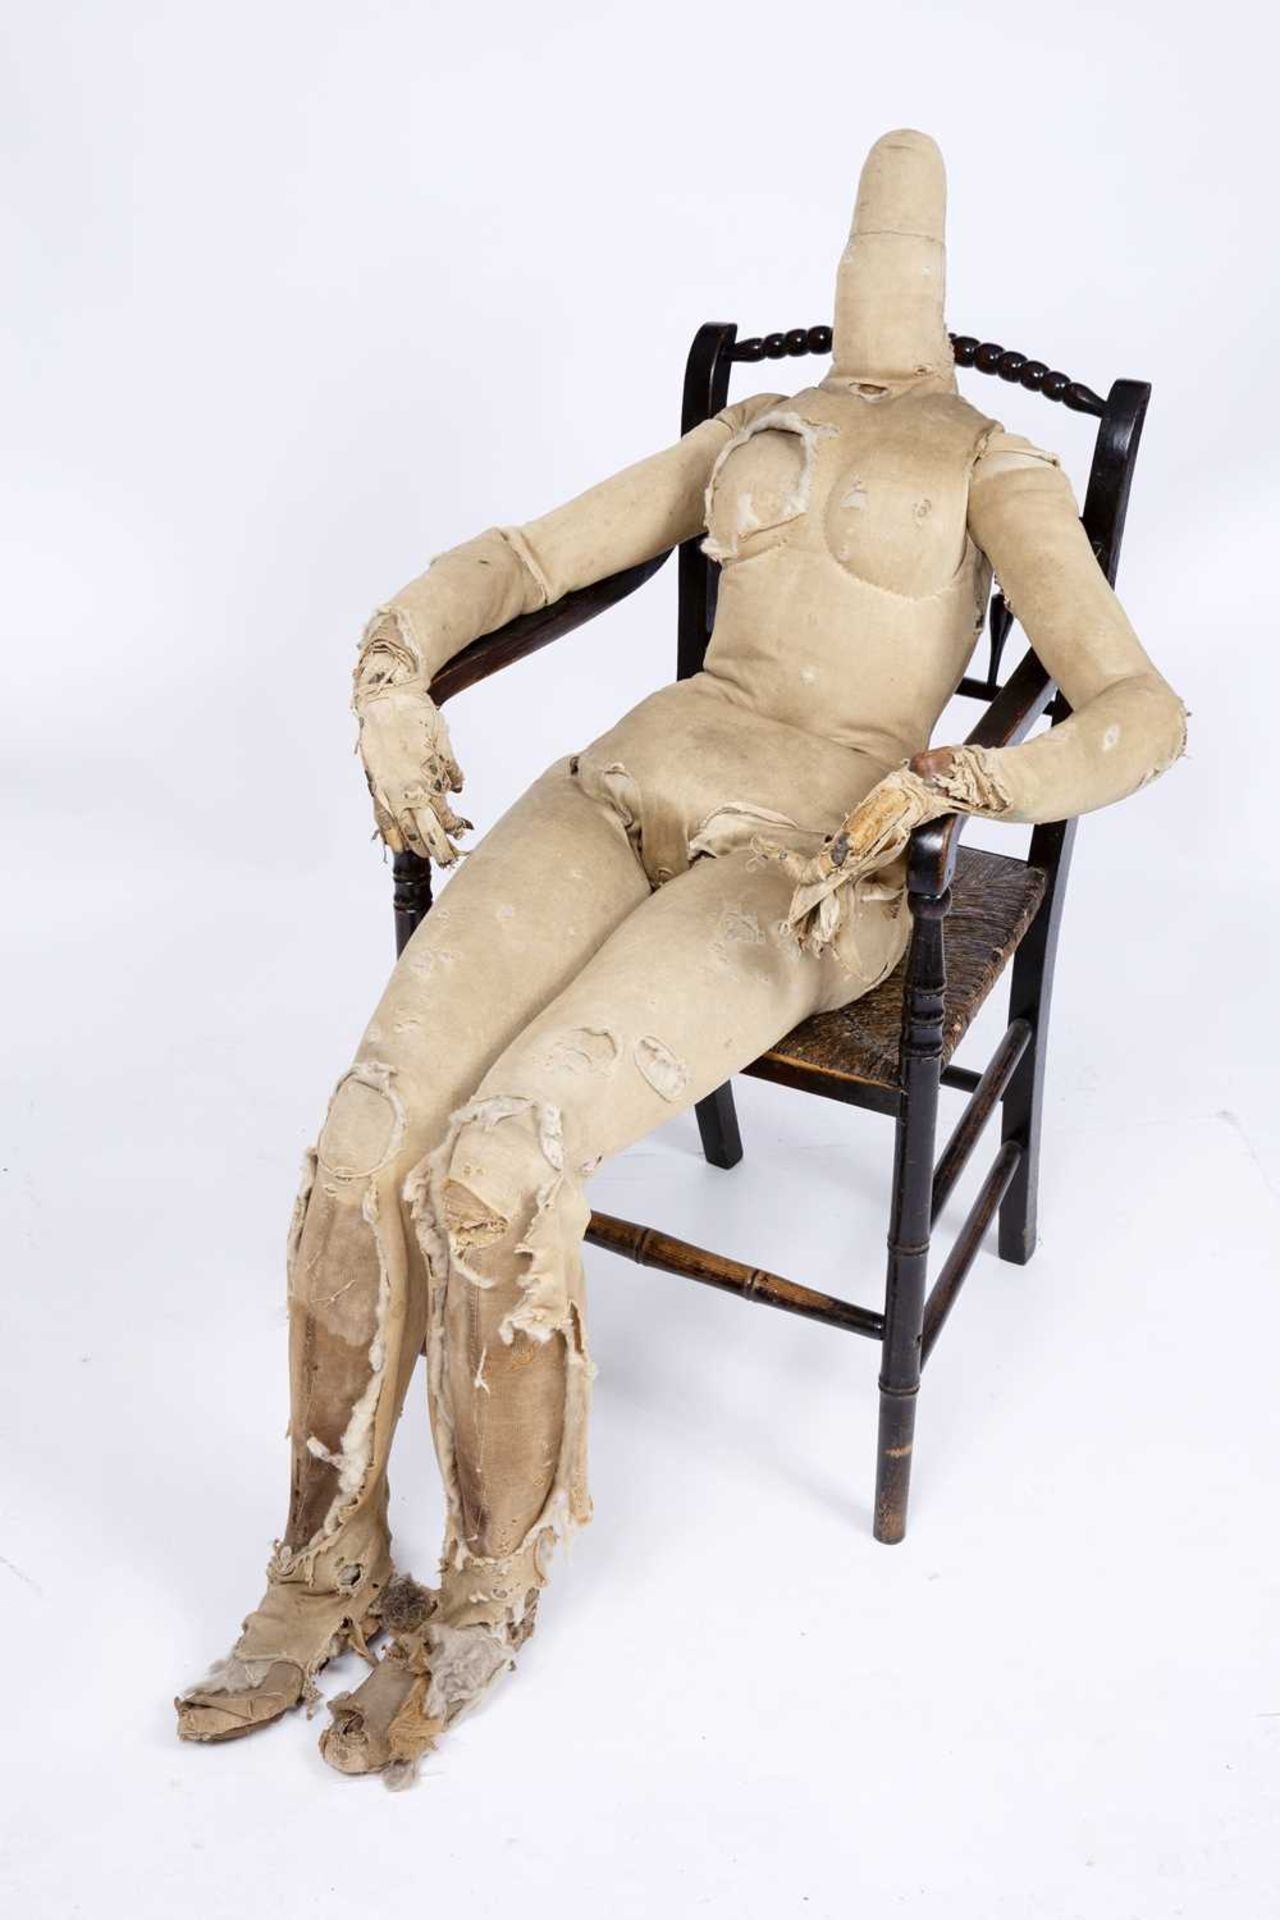 A mid 19th century adult size artists lay figure with articulated brass joints and a wooden frame - Image 3 of 5